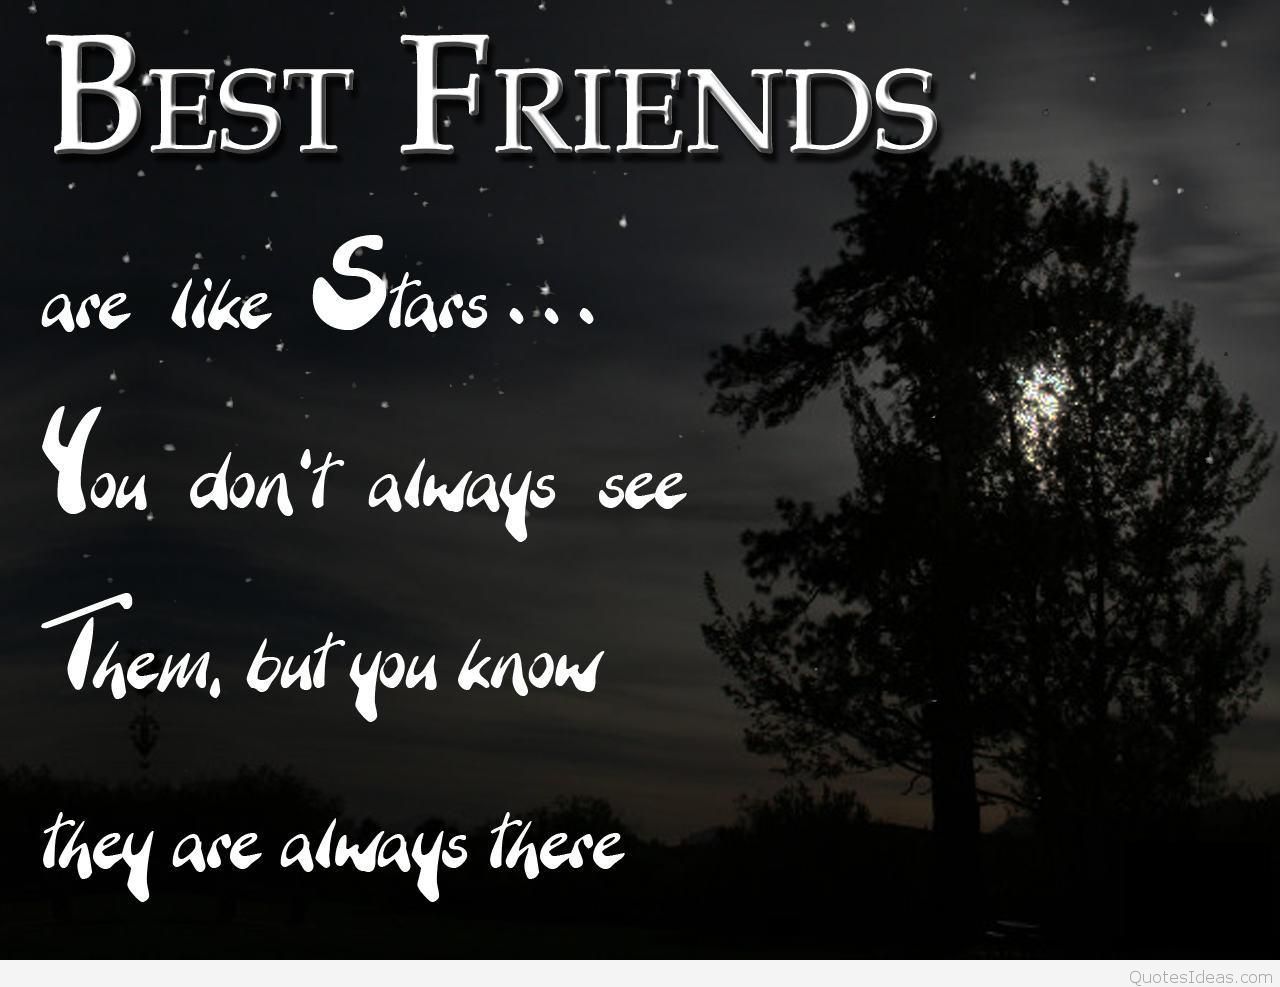 Best Friend Quotes Wallpapers on WallpaperDog